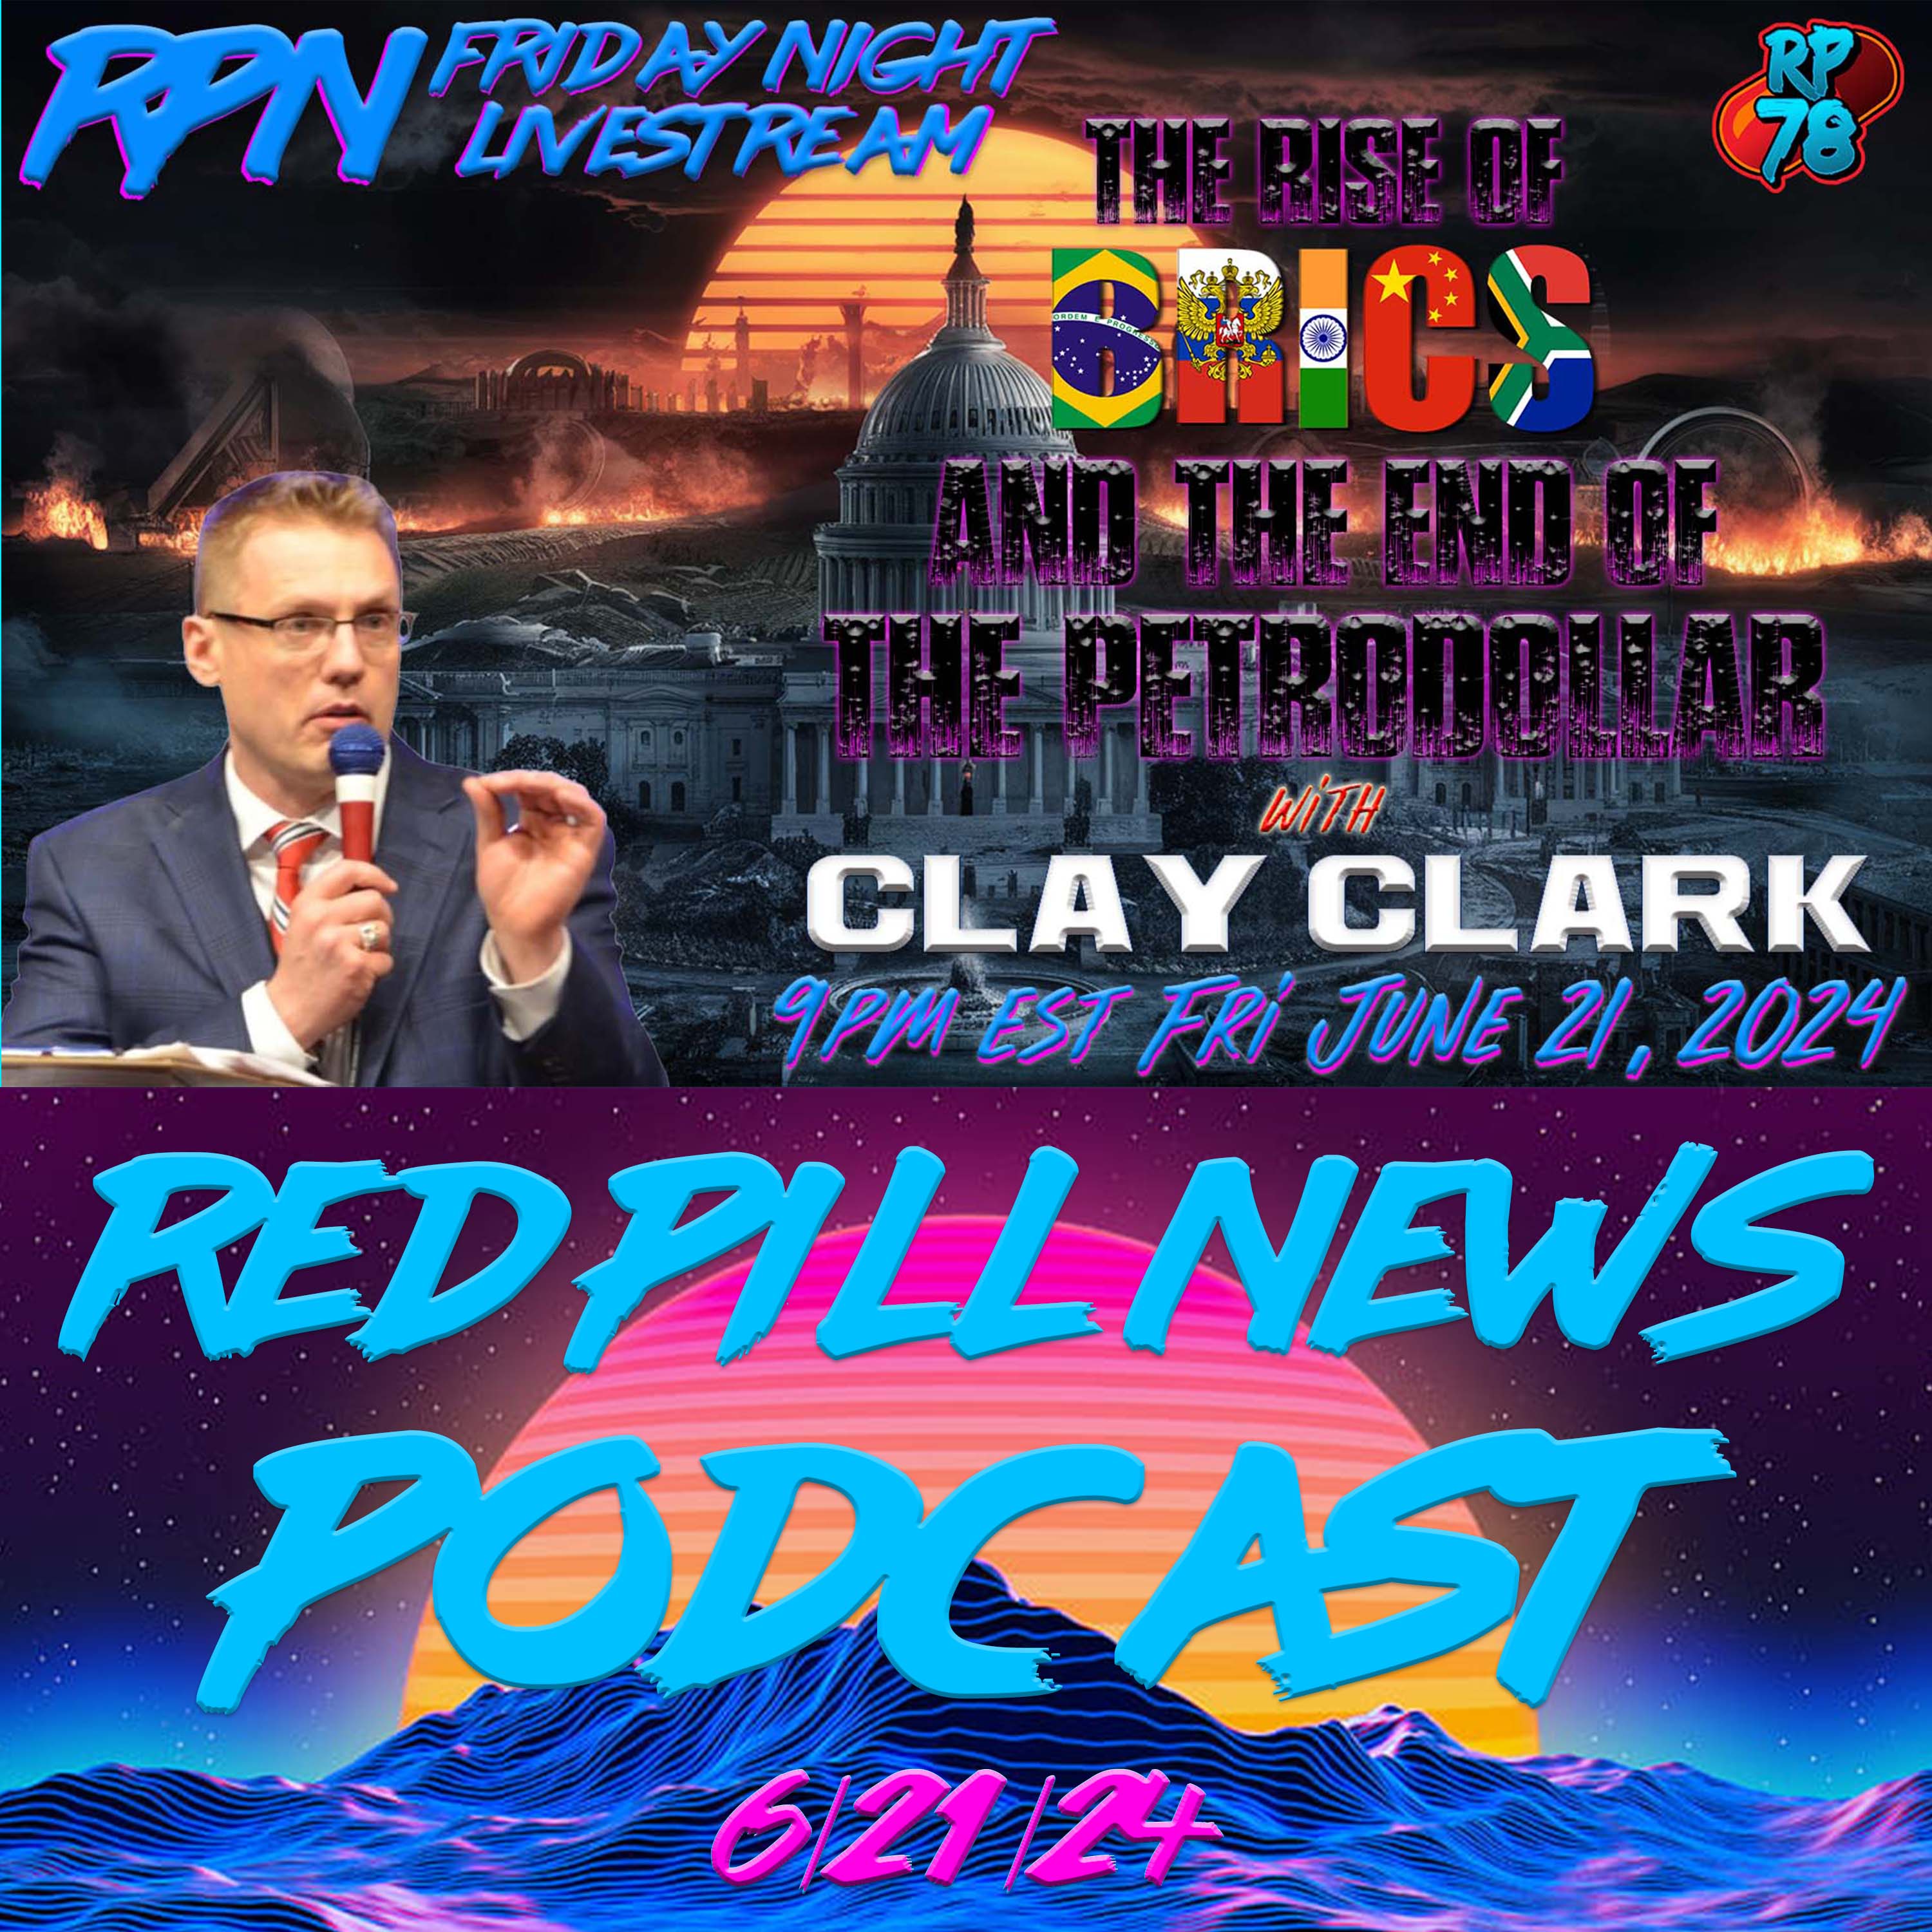 The Rise of BRICS & The End of The PetroDollar with Clay Clark on Fri Night Livestream